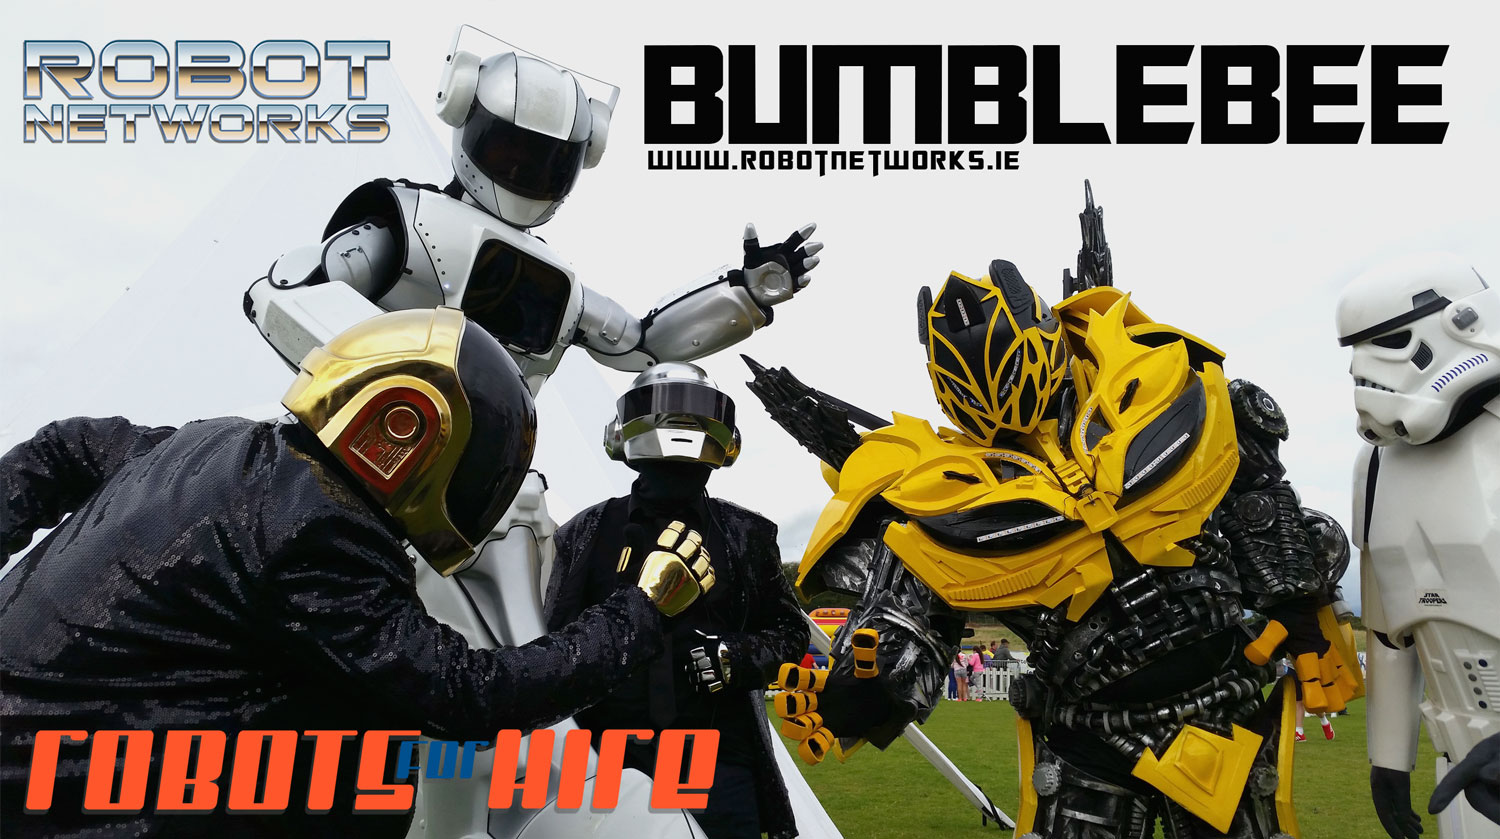 Robot-networks_BumbleBee_hire_dublin_events